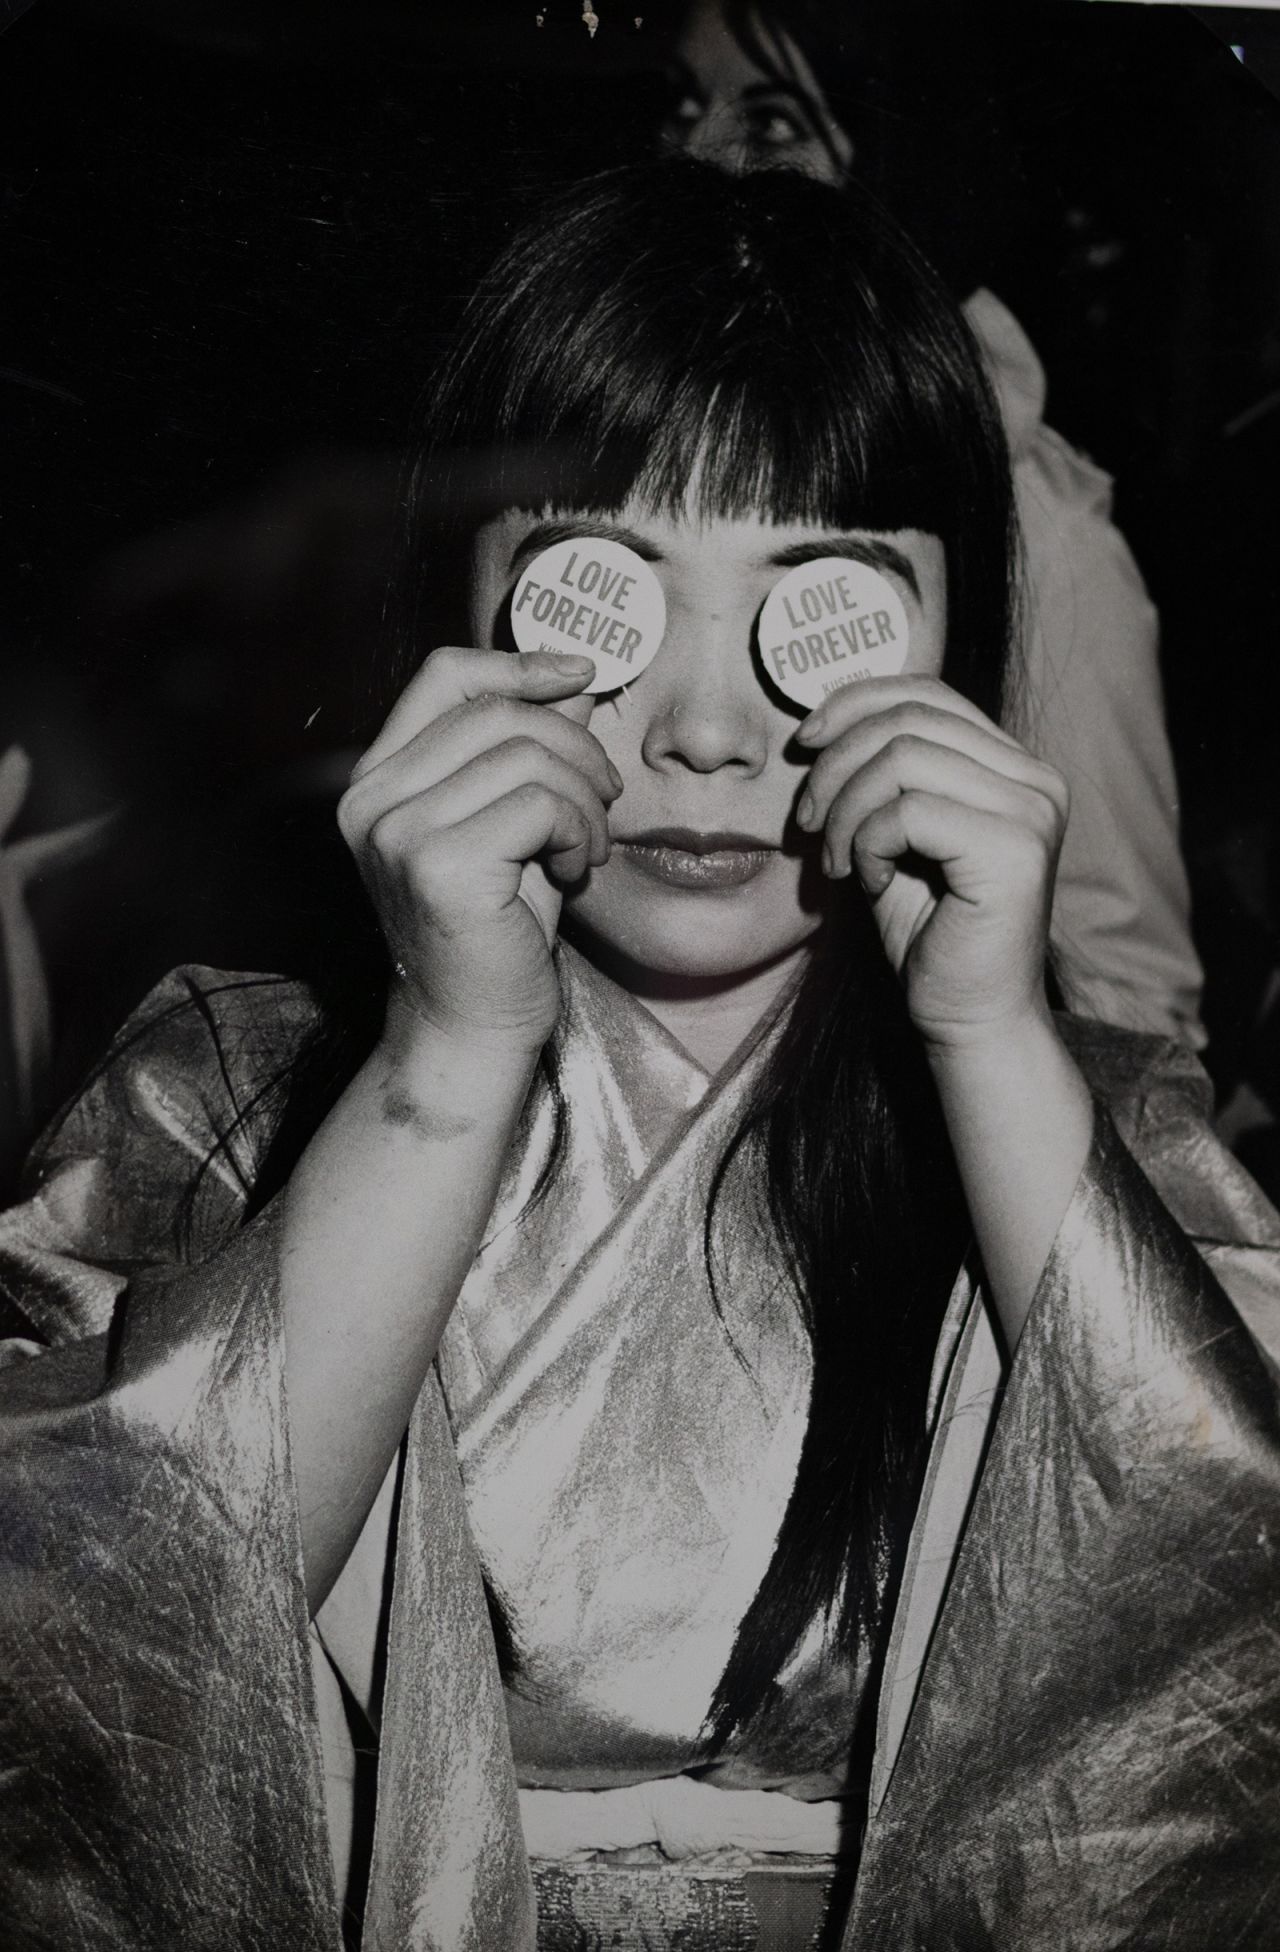 An archival shot of a young Yayoi Kusama shown at the museum.  